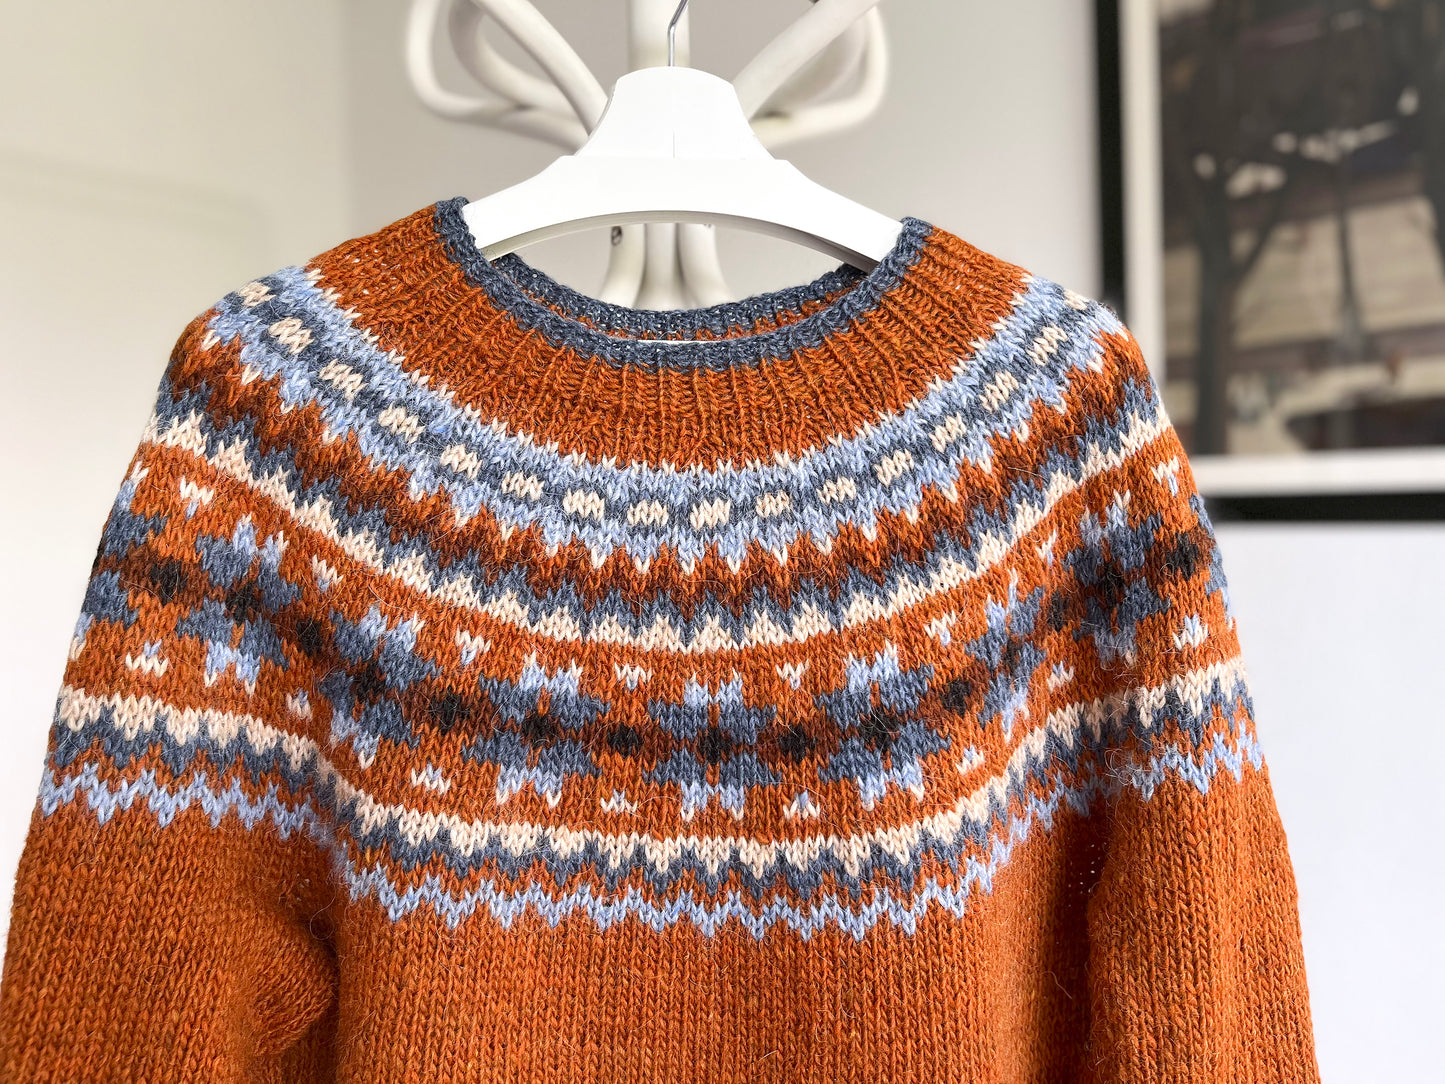 Details of Orange and blue Icelandic lopapeysa knitted sweater from Lettlopi pure Icelandic wool in Rósir design